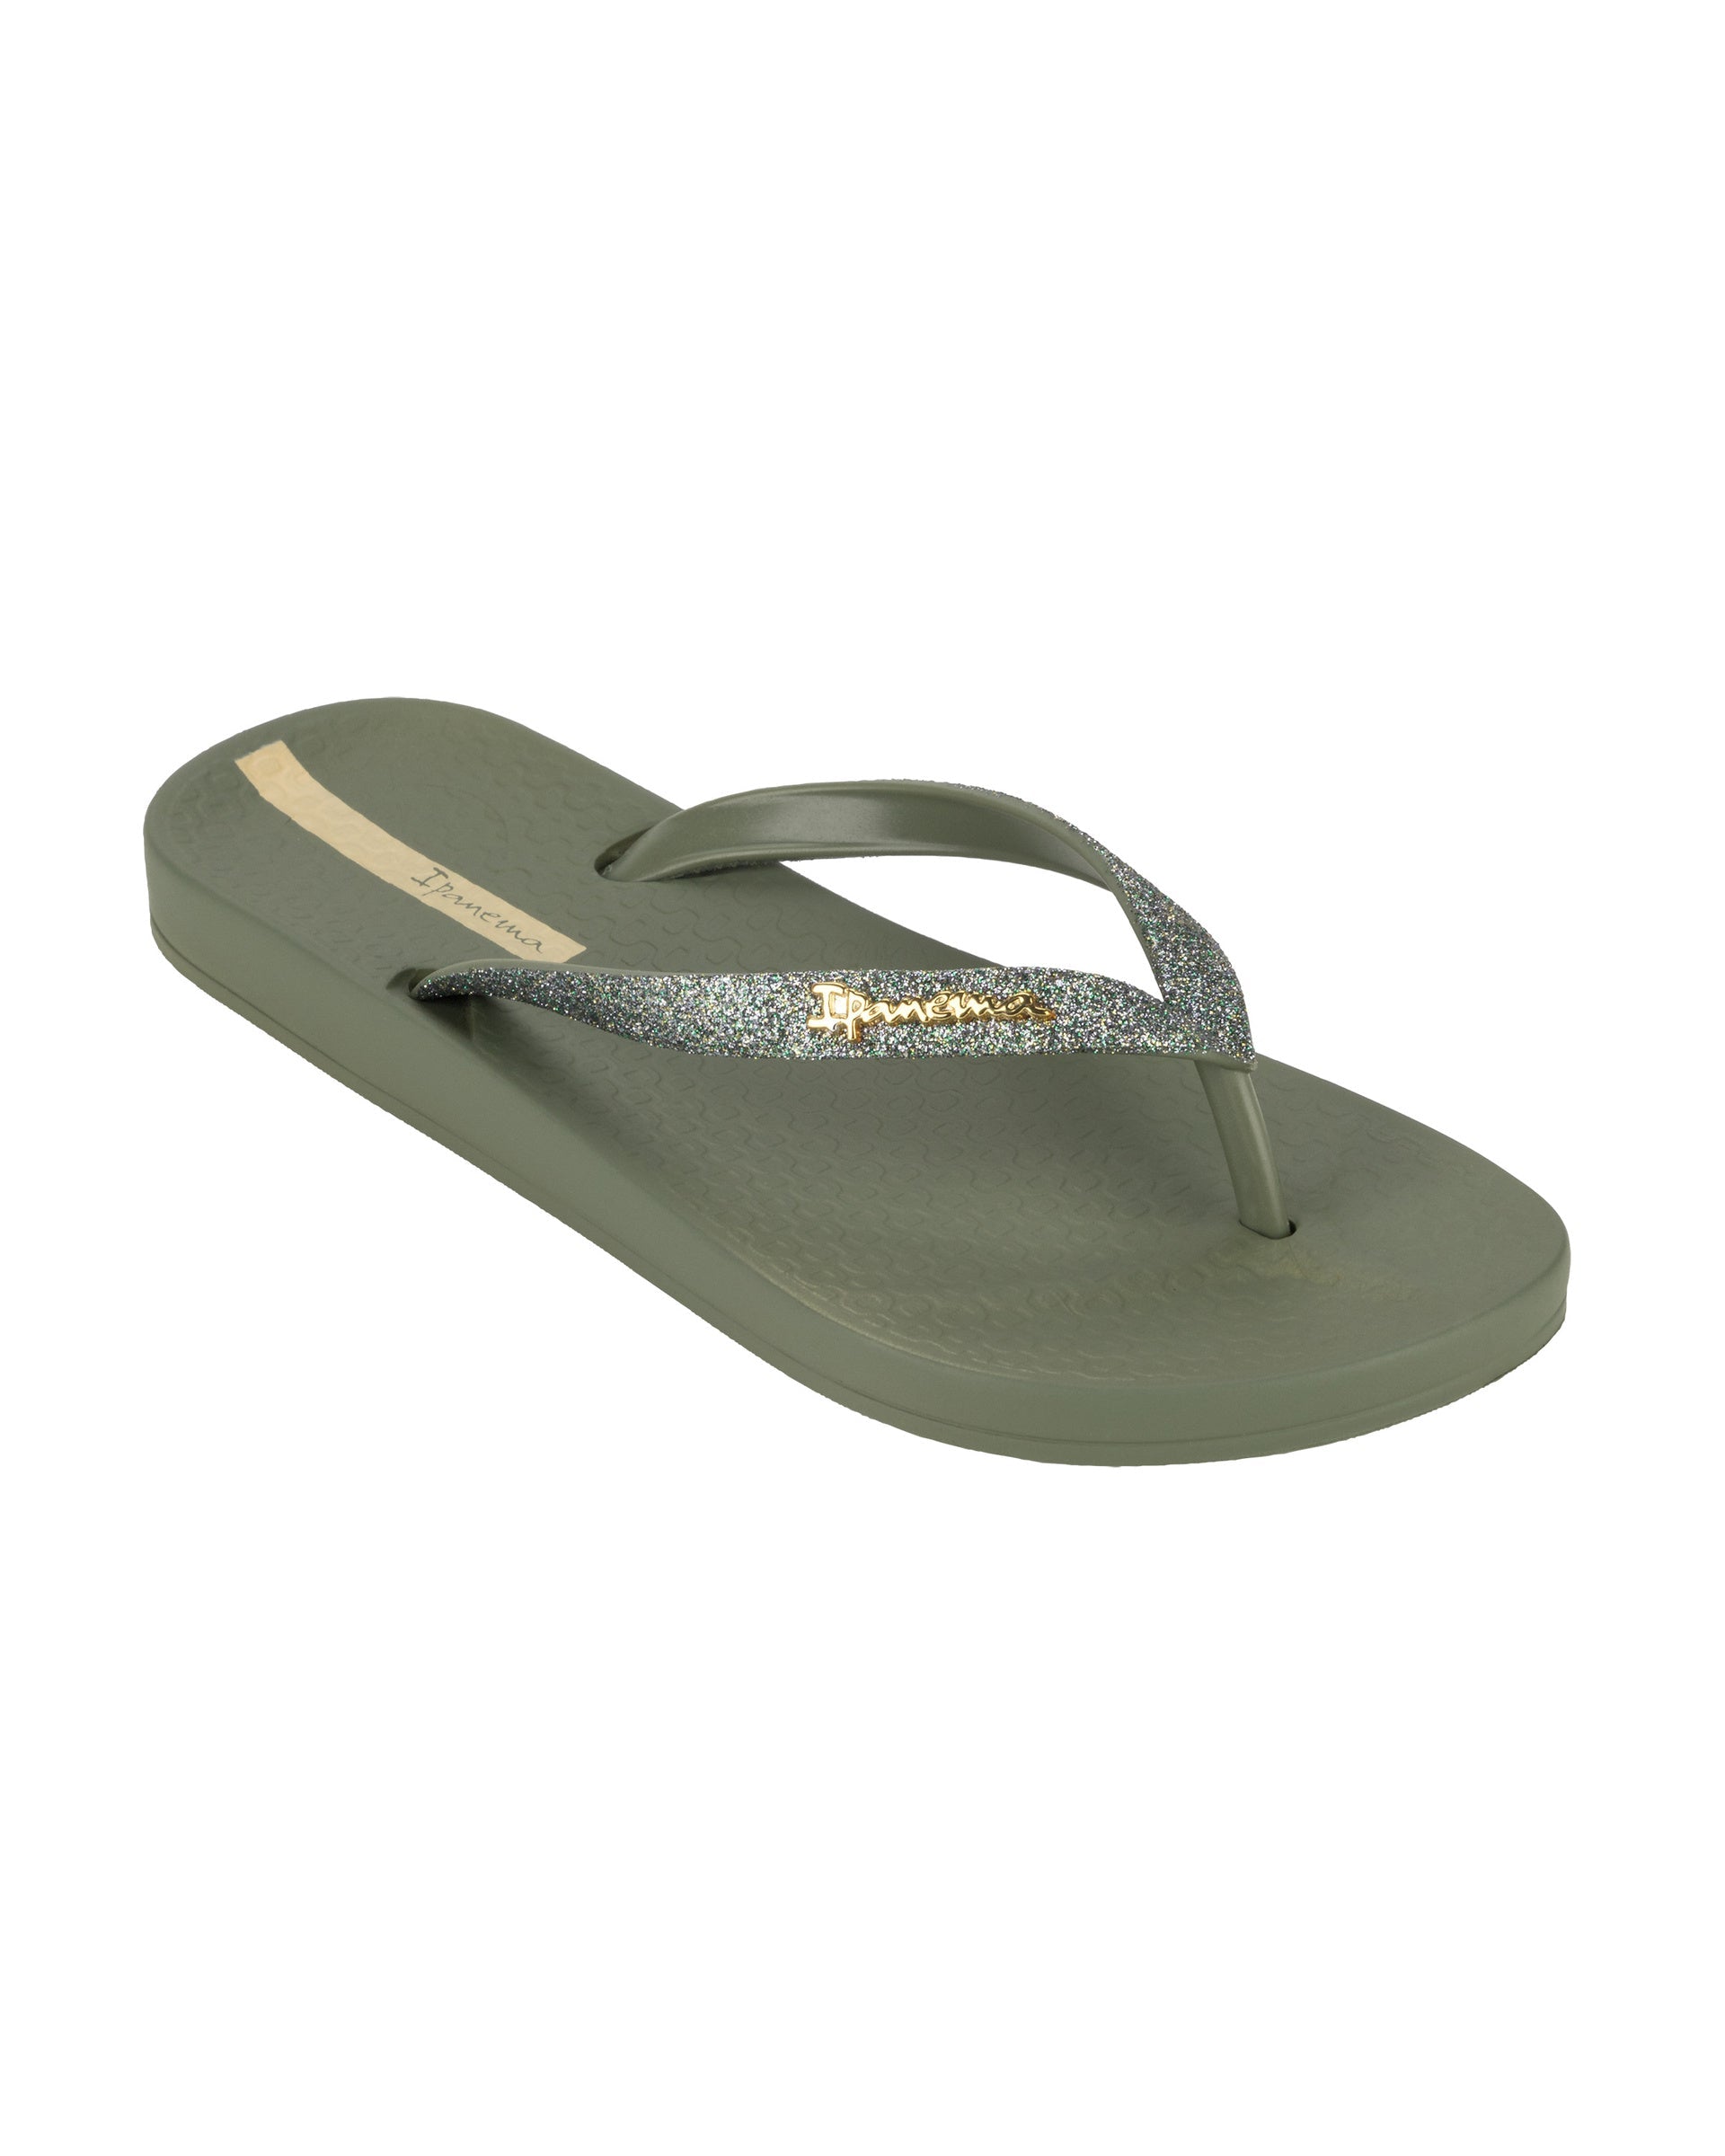 Angled view of a green Ipanema Ana Sparkle women's flip flop with glitter green straps.